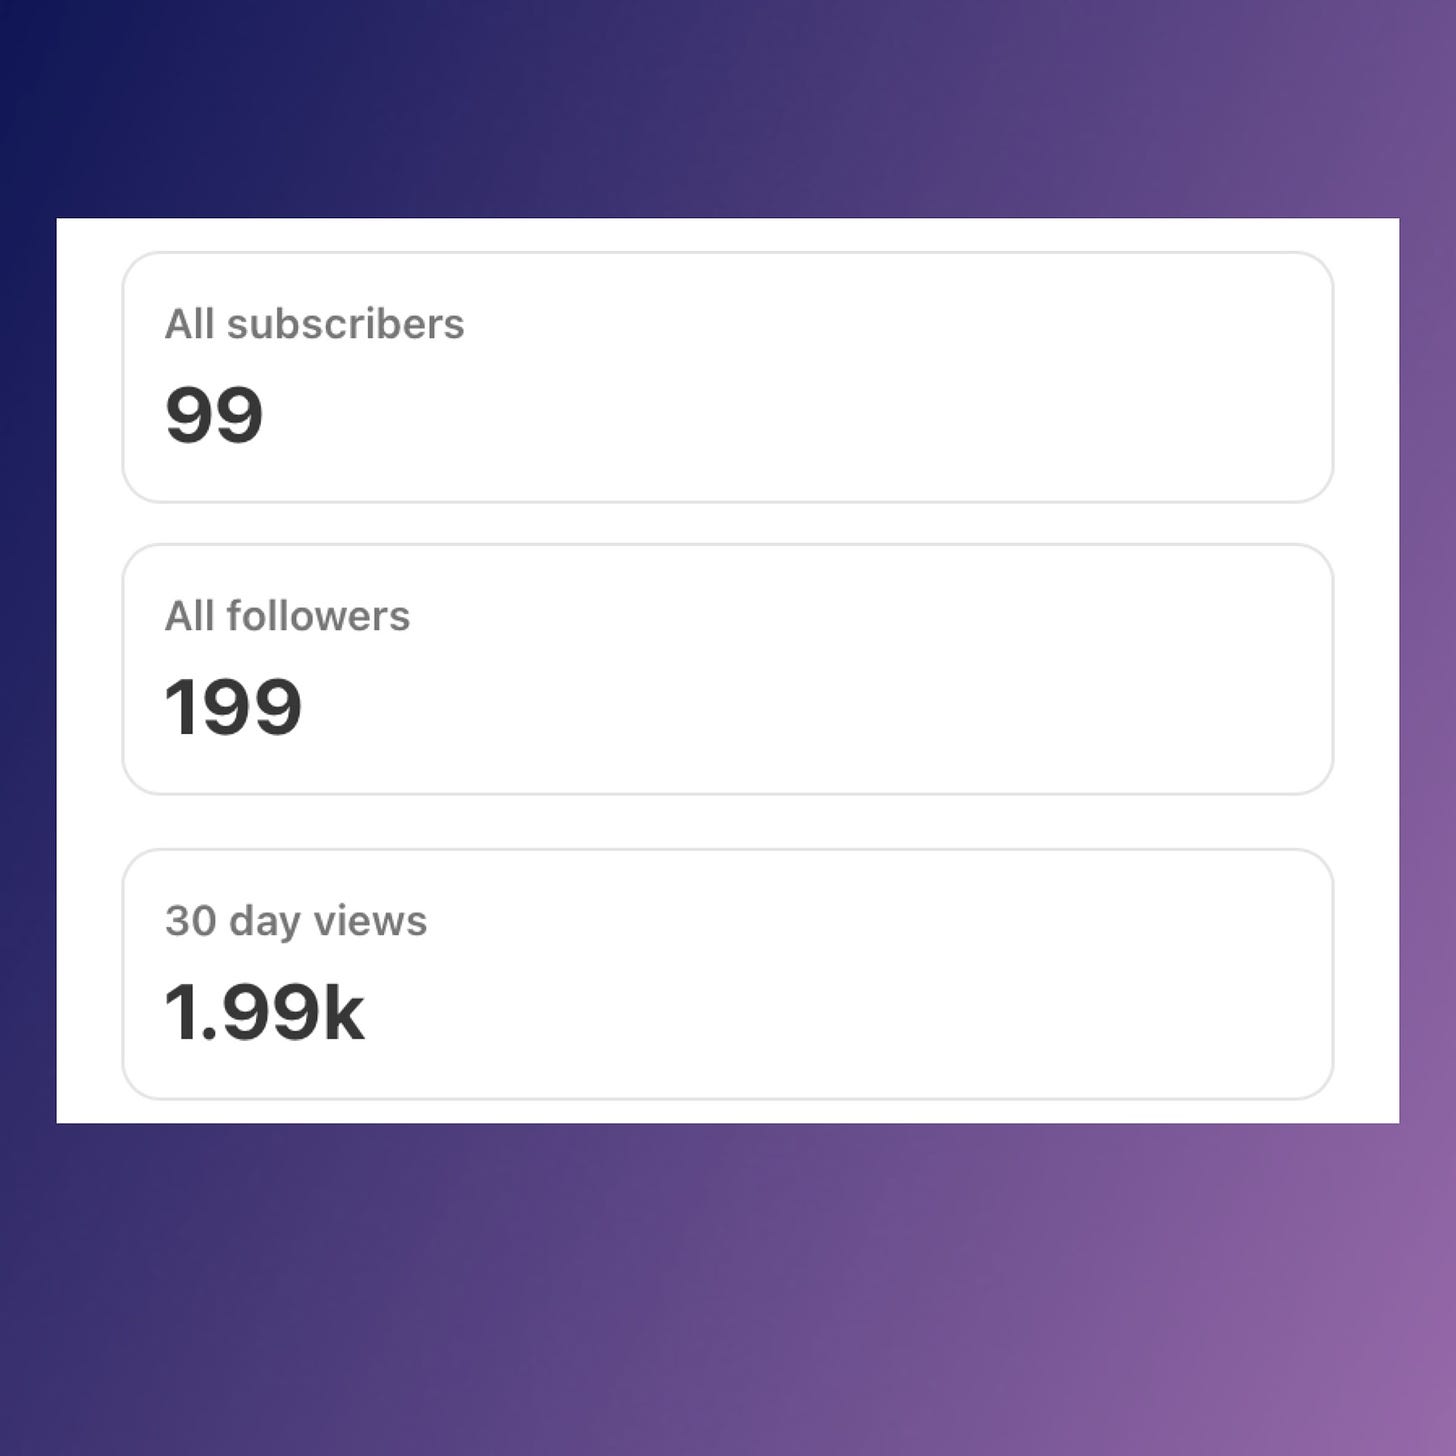 Metrics showing 99 subscribers, 199 followers, and 1.99k views in 30 days